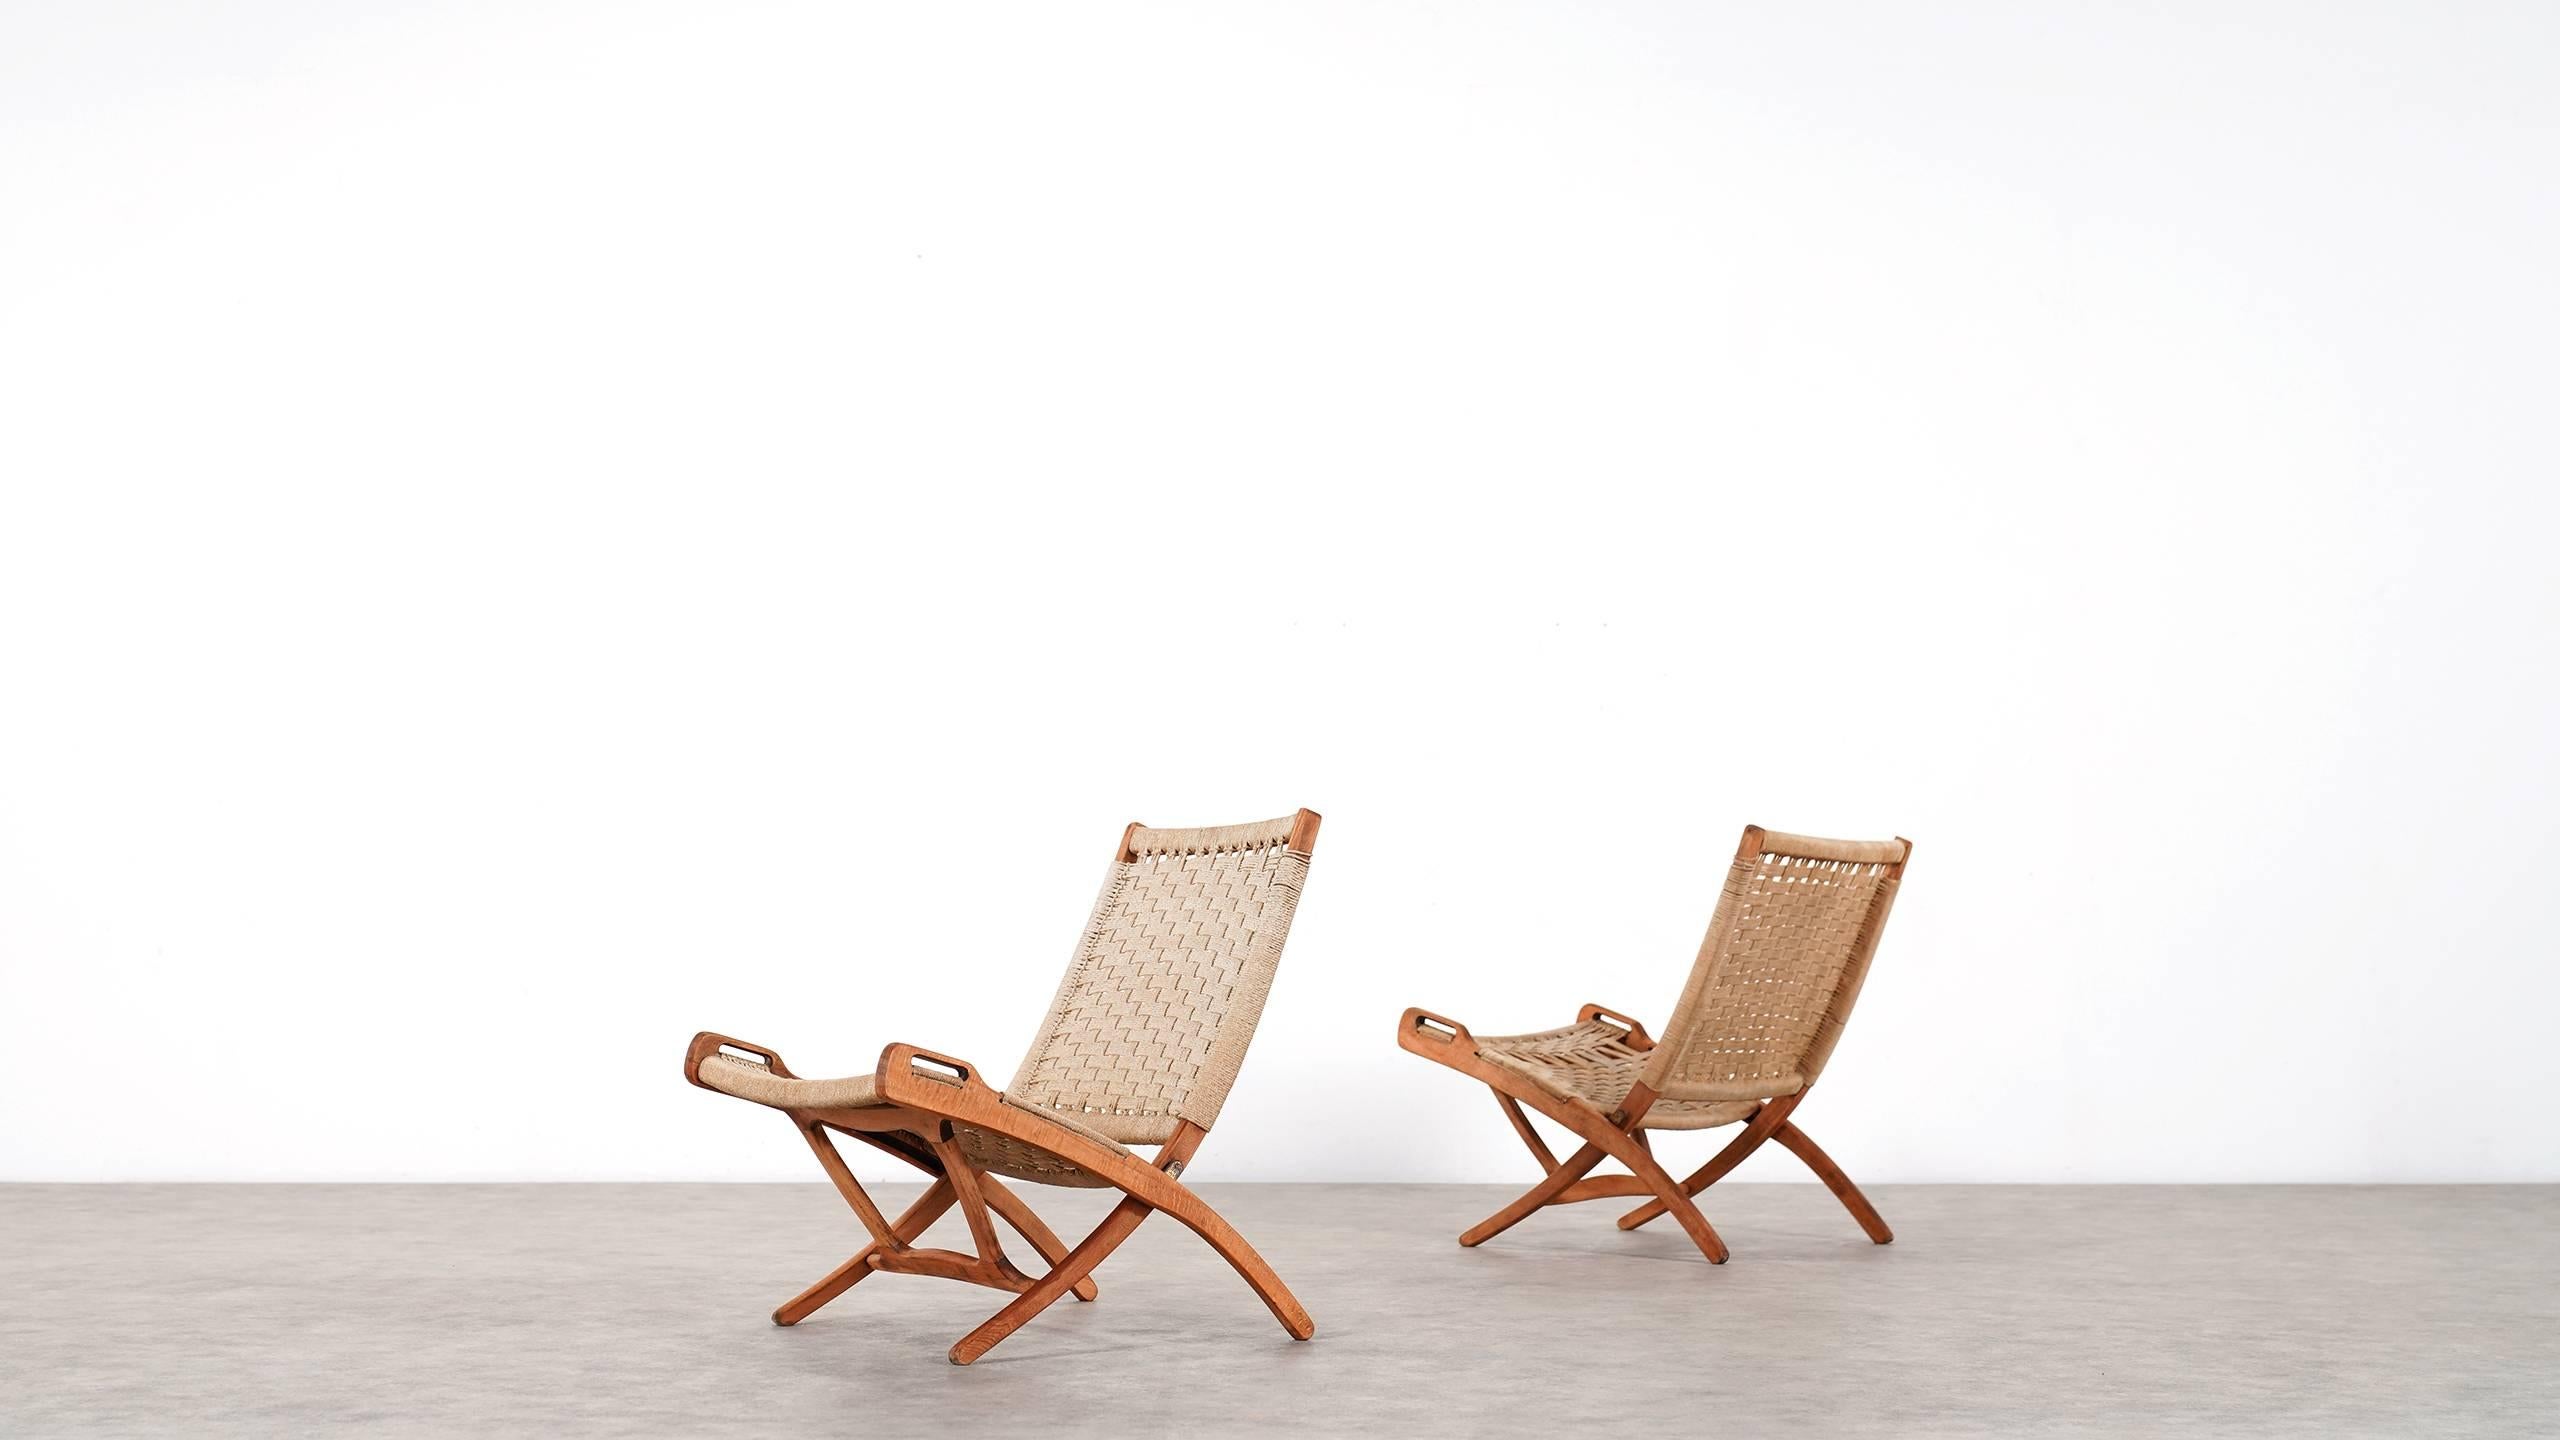 Mid-20th Century Folding Chair, Hans J. Wegner Style, Wood and Rope Covering, circa 1960